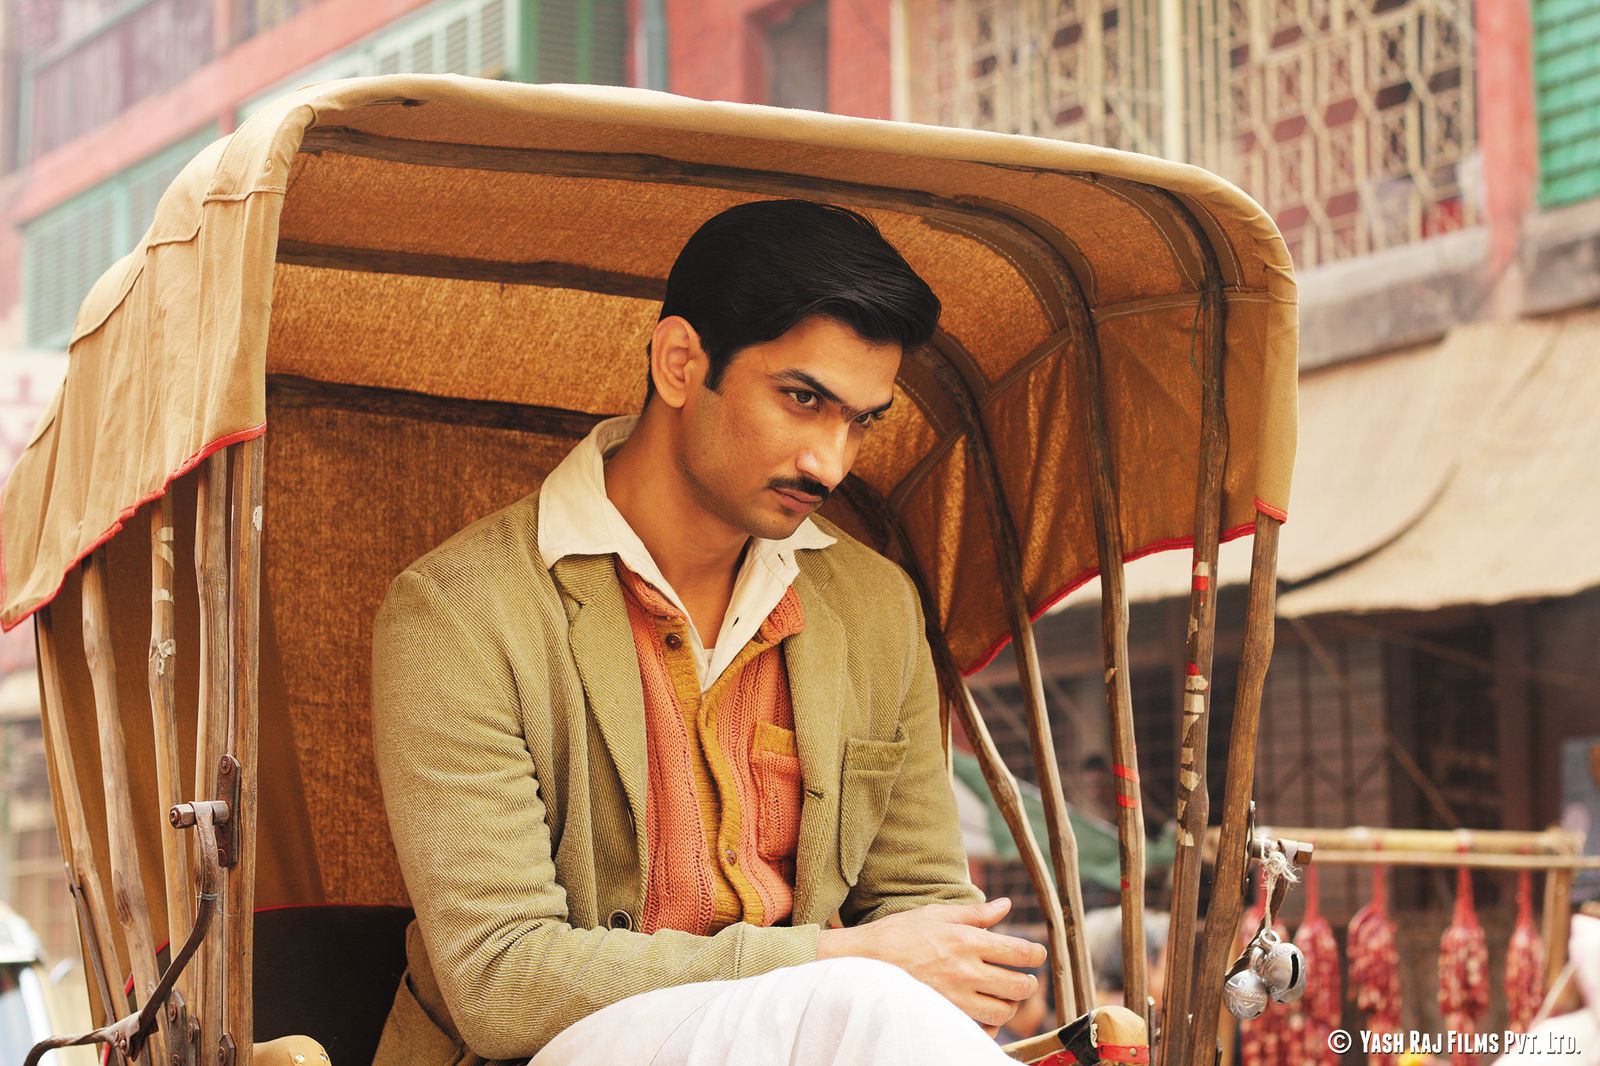 Sushant Singh Rajput YRF Contract: Actor Was Paid Rs. 30 Lakhs For Shudh Desi Romance, Rs. 1 Crore For Byomkesh Bakshi